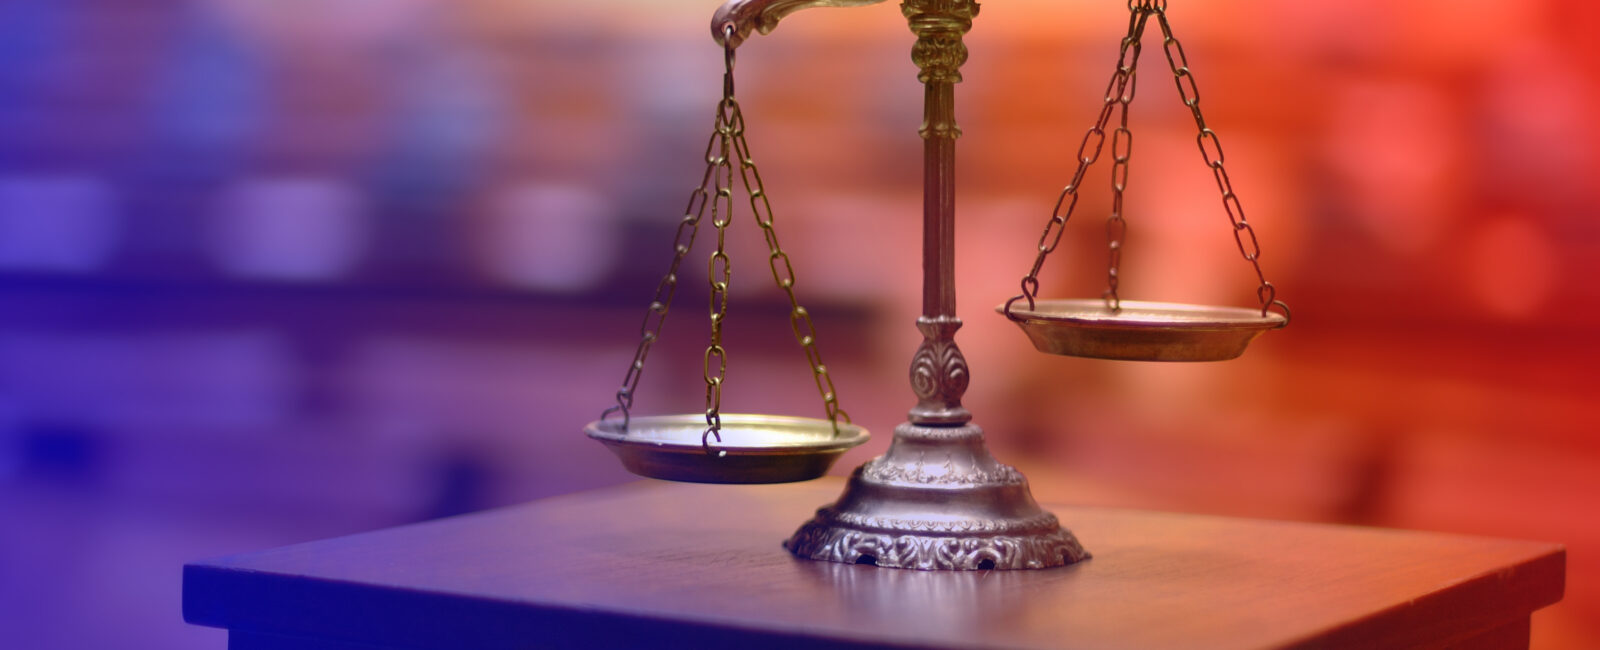 Weighing scales (scales of justice) against a blurred courtroom background